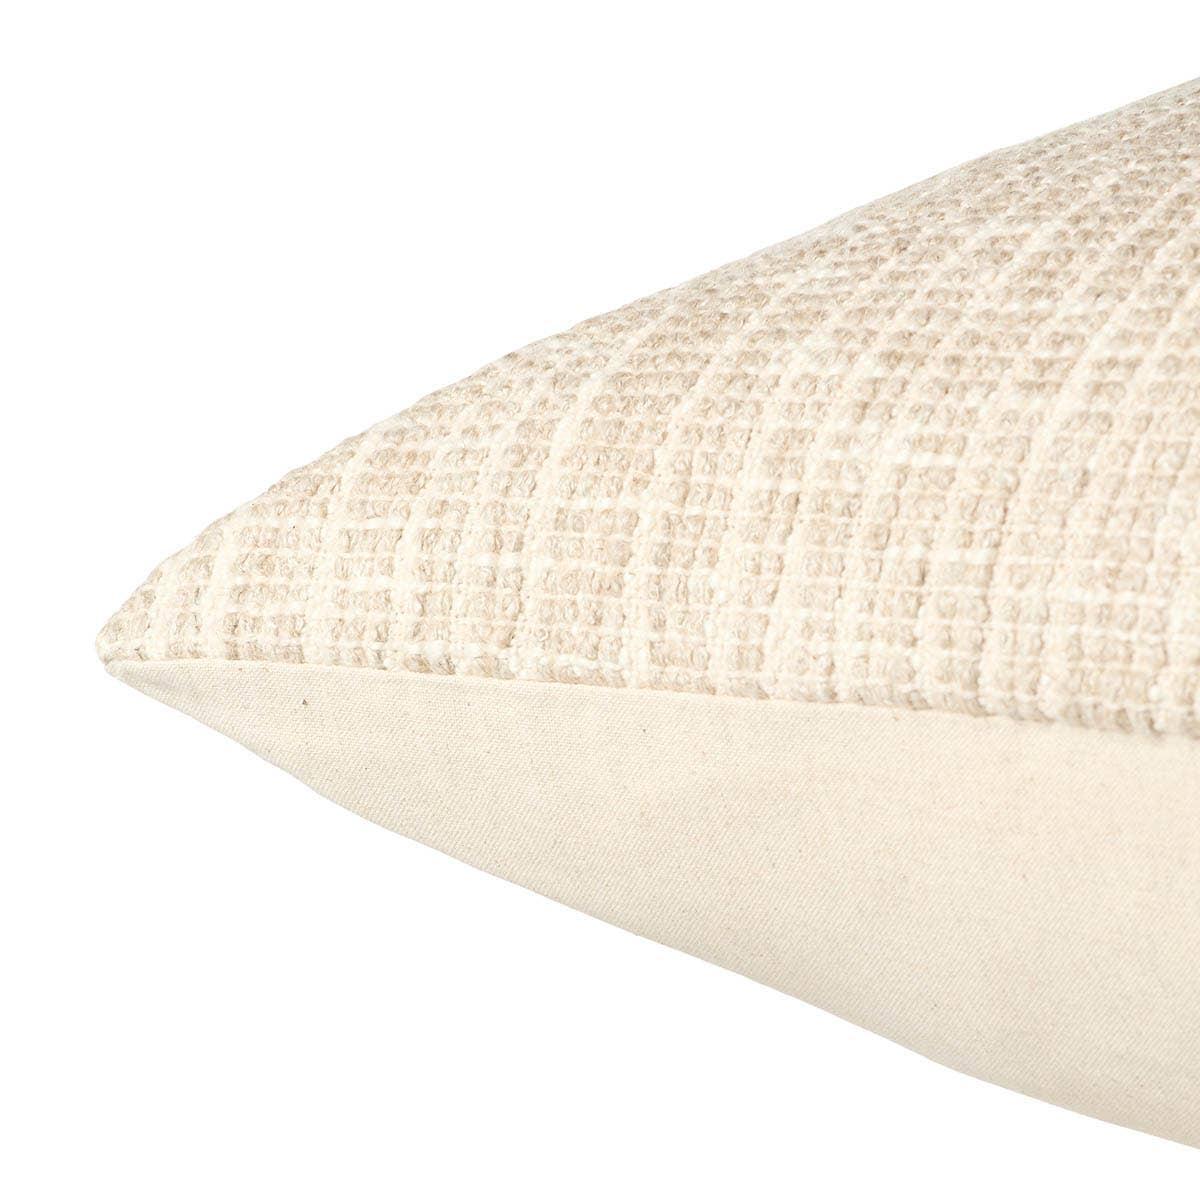 The handcrafted Cueva throw pillow delights with a striped plaid design in hues of cream and beige. The neutral tones establish a versatile accent piece that works in any indoor space.Indoor Pillow Amethyst Home provides interior design, new home construction design consulting, vintage area rugs, and lighting in the Scottsdale metro area.